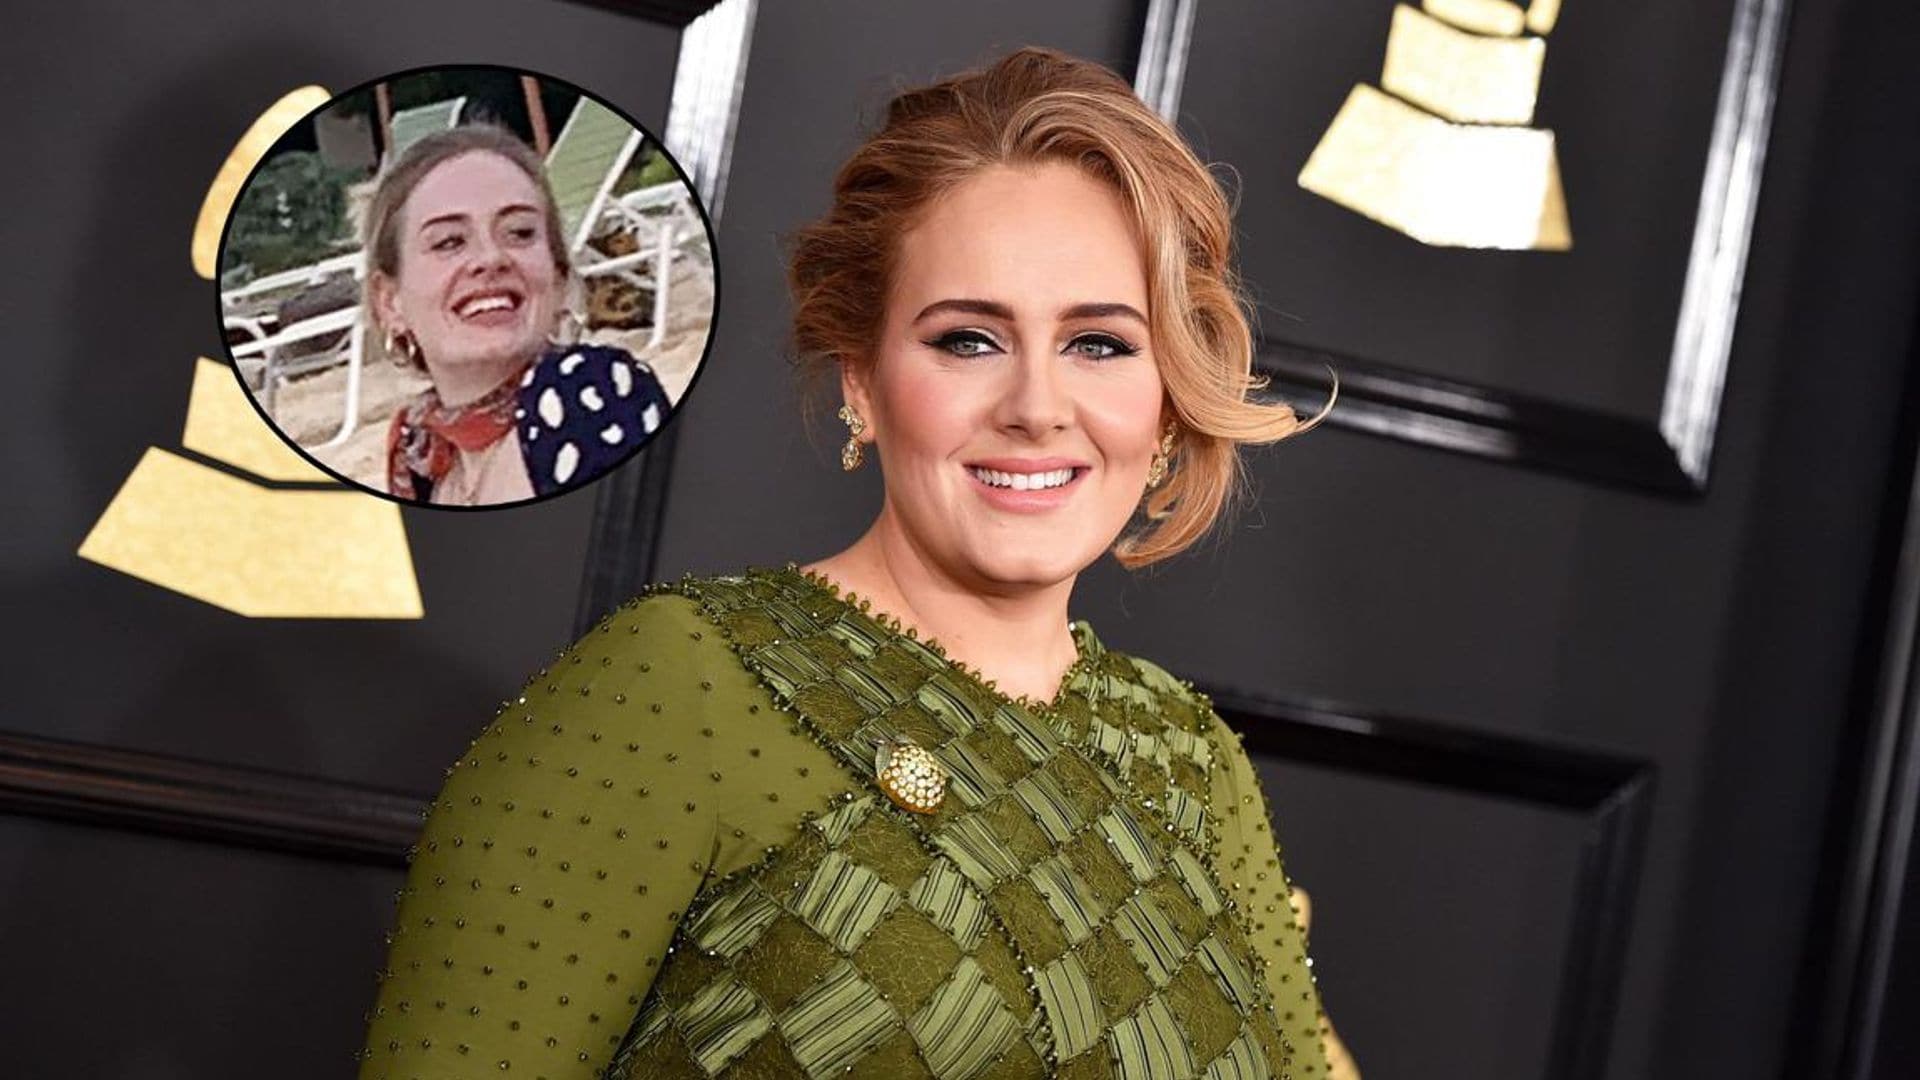 Adele’s Brazilian trainer shares the secrets of the star’s diet that helped her lose 6 stones